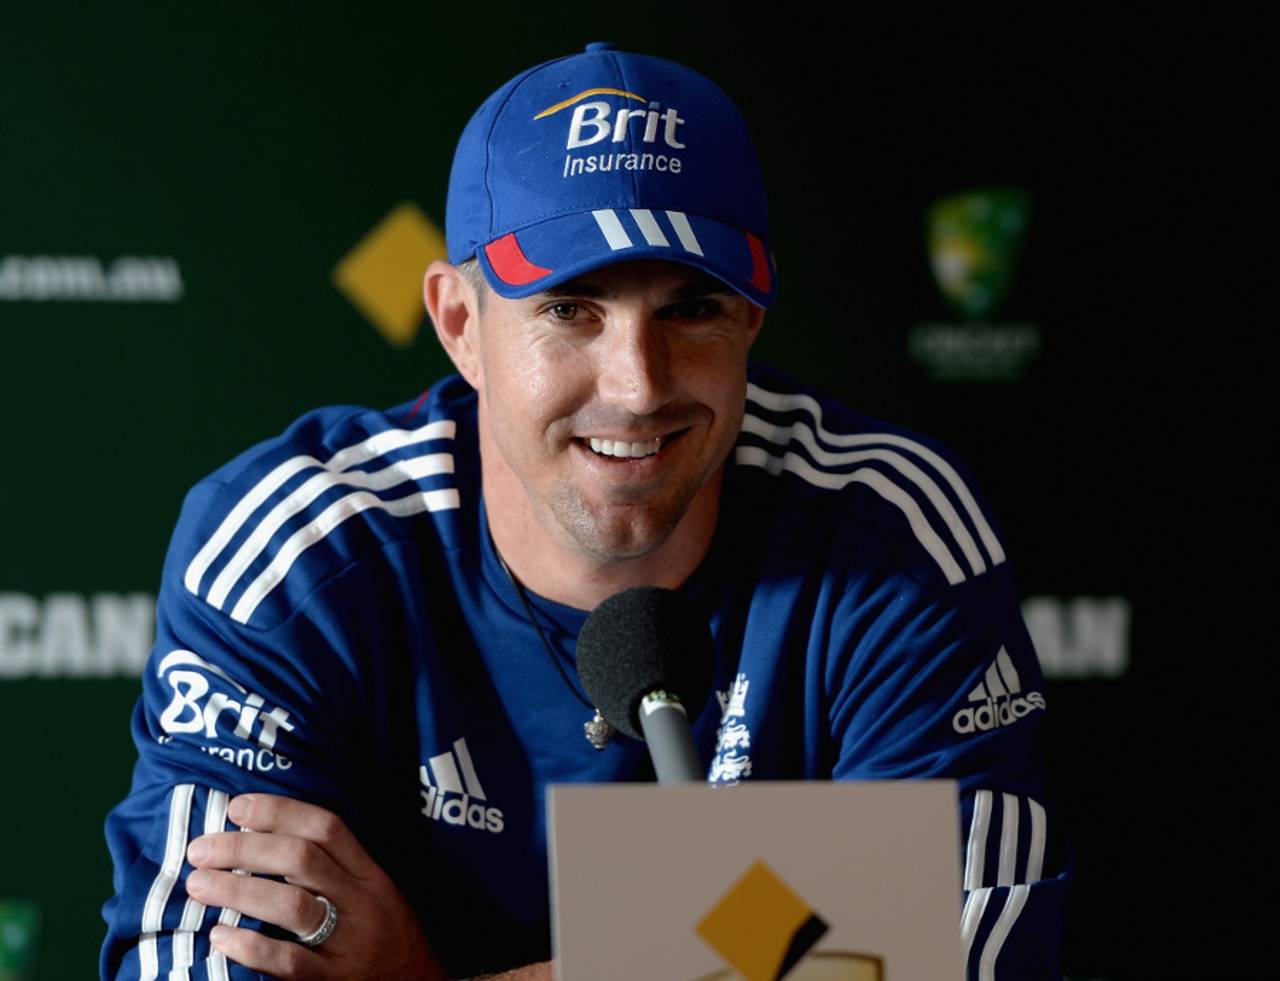 Pietersen's career and his life, his bat and his self-esteem, were completely intertwined. There was something honest about it, but also almost scary&nbsp;&nbsp;&bull;&nbsp;&nbsp;Getty Images